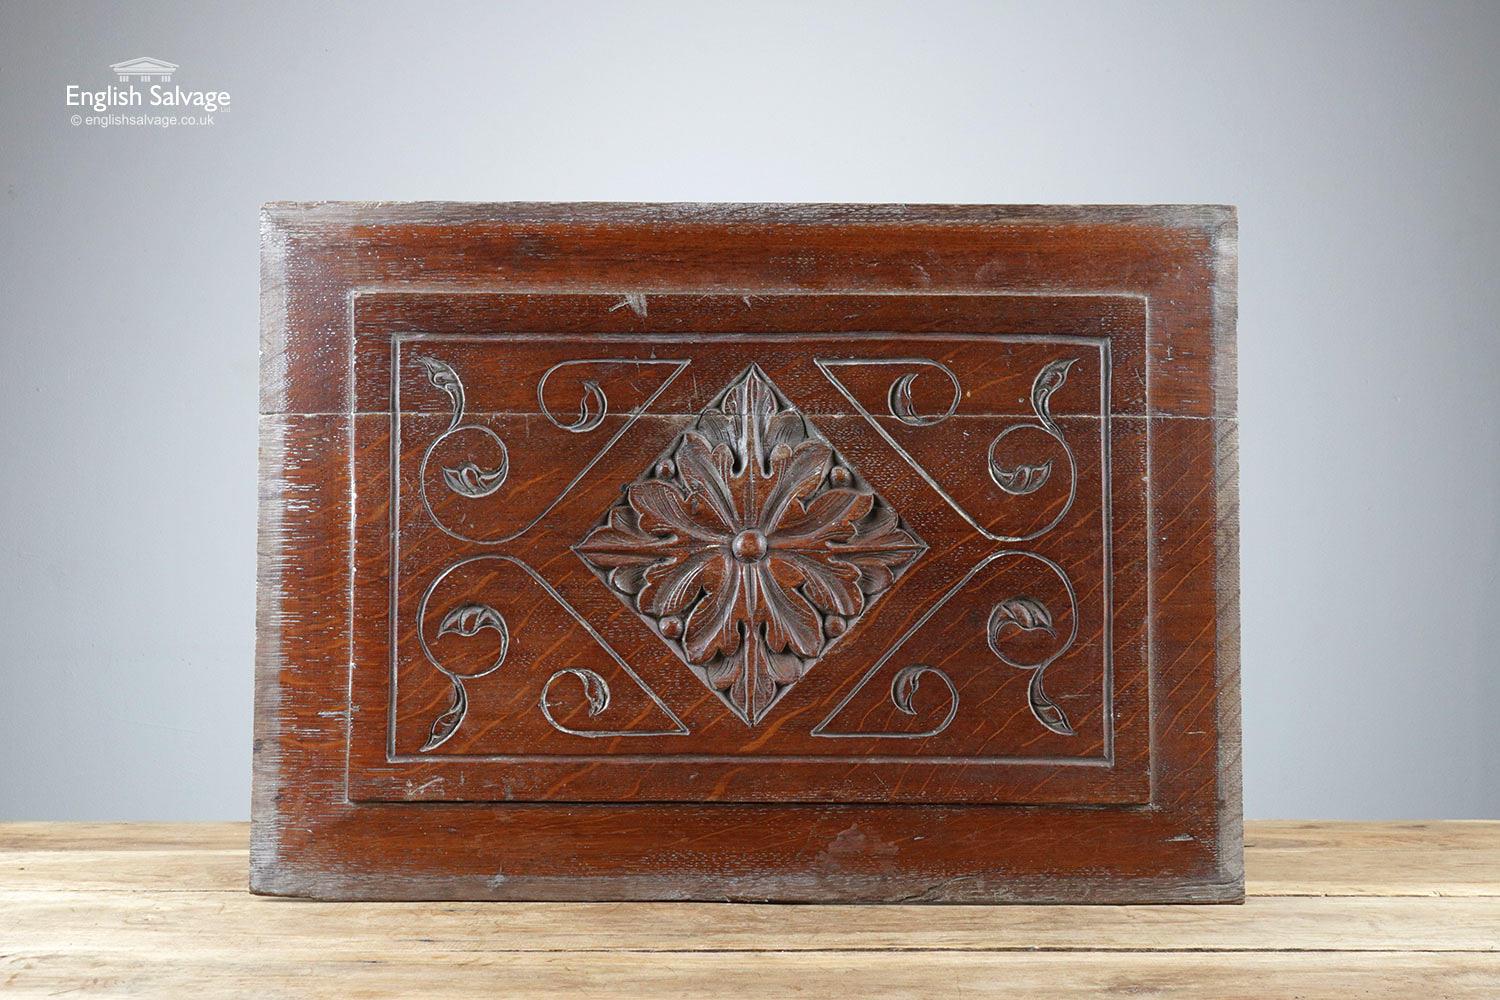 Job lot of antique hand carved oak panels. Attractive floral cartouche to the centre surrounded by scrolls and leaves. Measurements below are for the two larger pieces (one is split into two as shown but could be re-glued as the break is clean). The